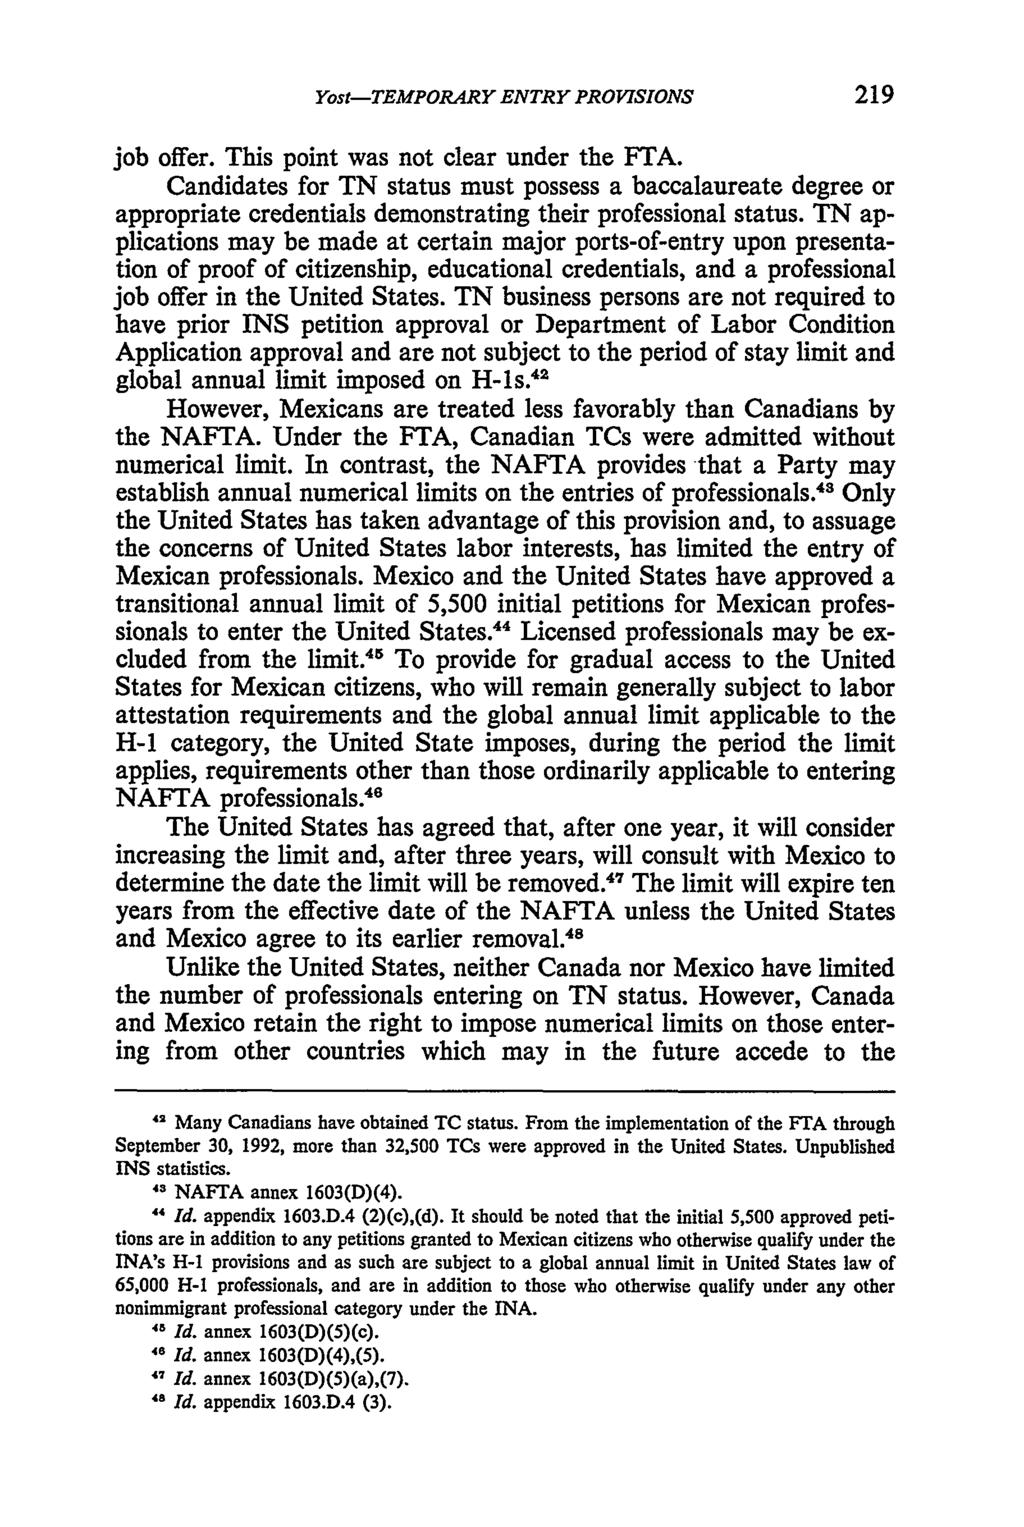 Yost: NAFTA--Temporary Entry Provisions--Immigration Dimensions Yost-TEMPORARY ENTRY PROVISIONS job offer. This point was not clear under the FTA.